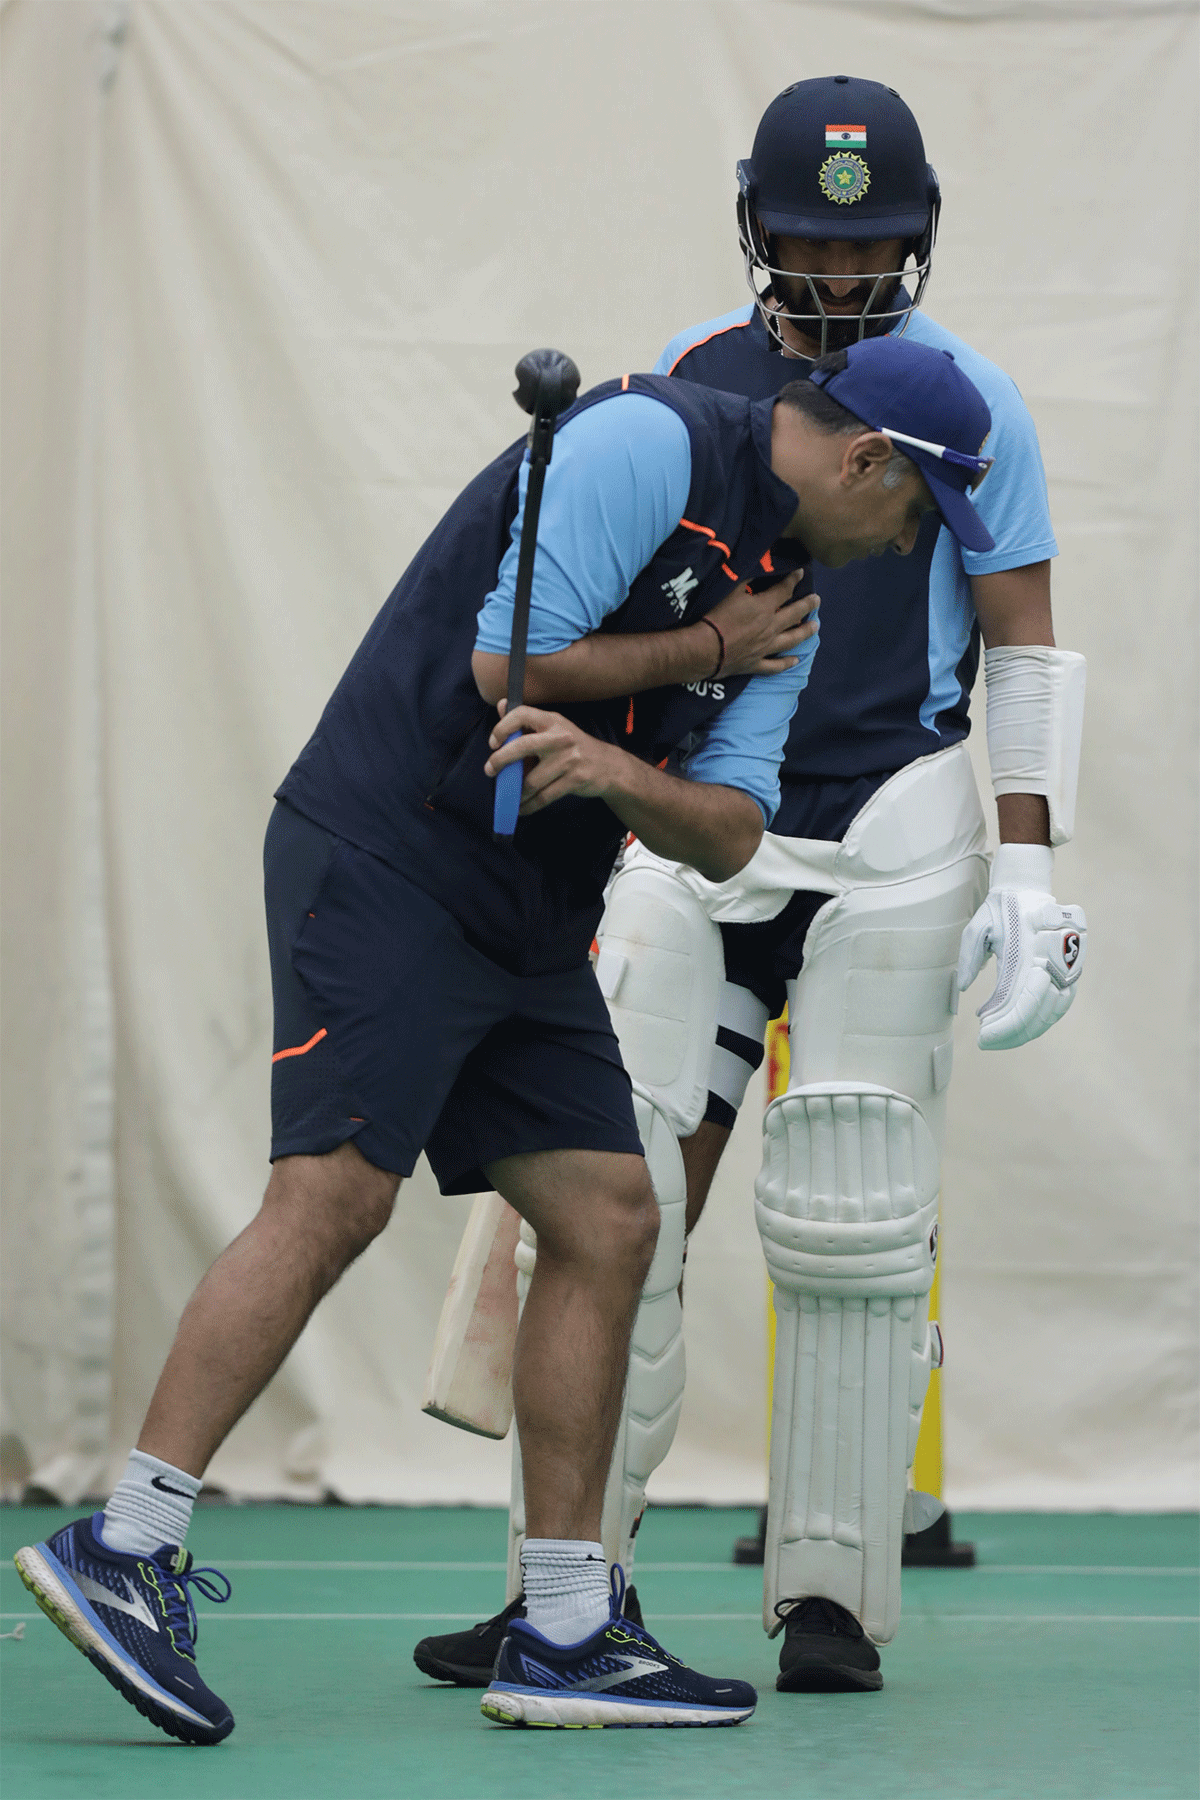 Cheteshwar Pujara watches keenly as Rahul Dravid coaches him in the nets